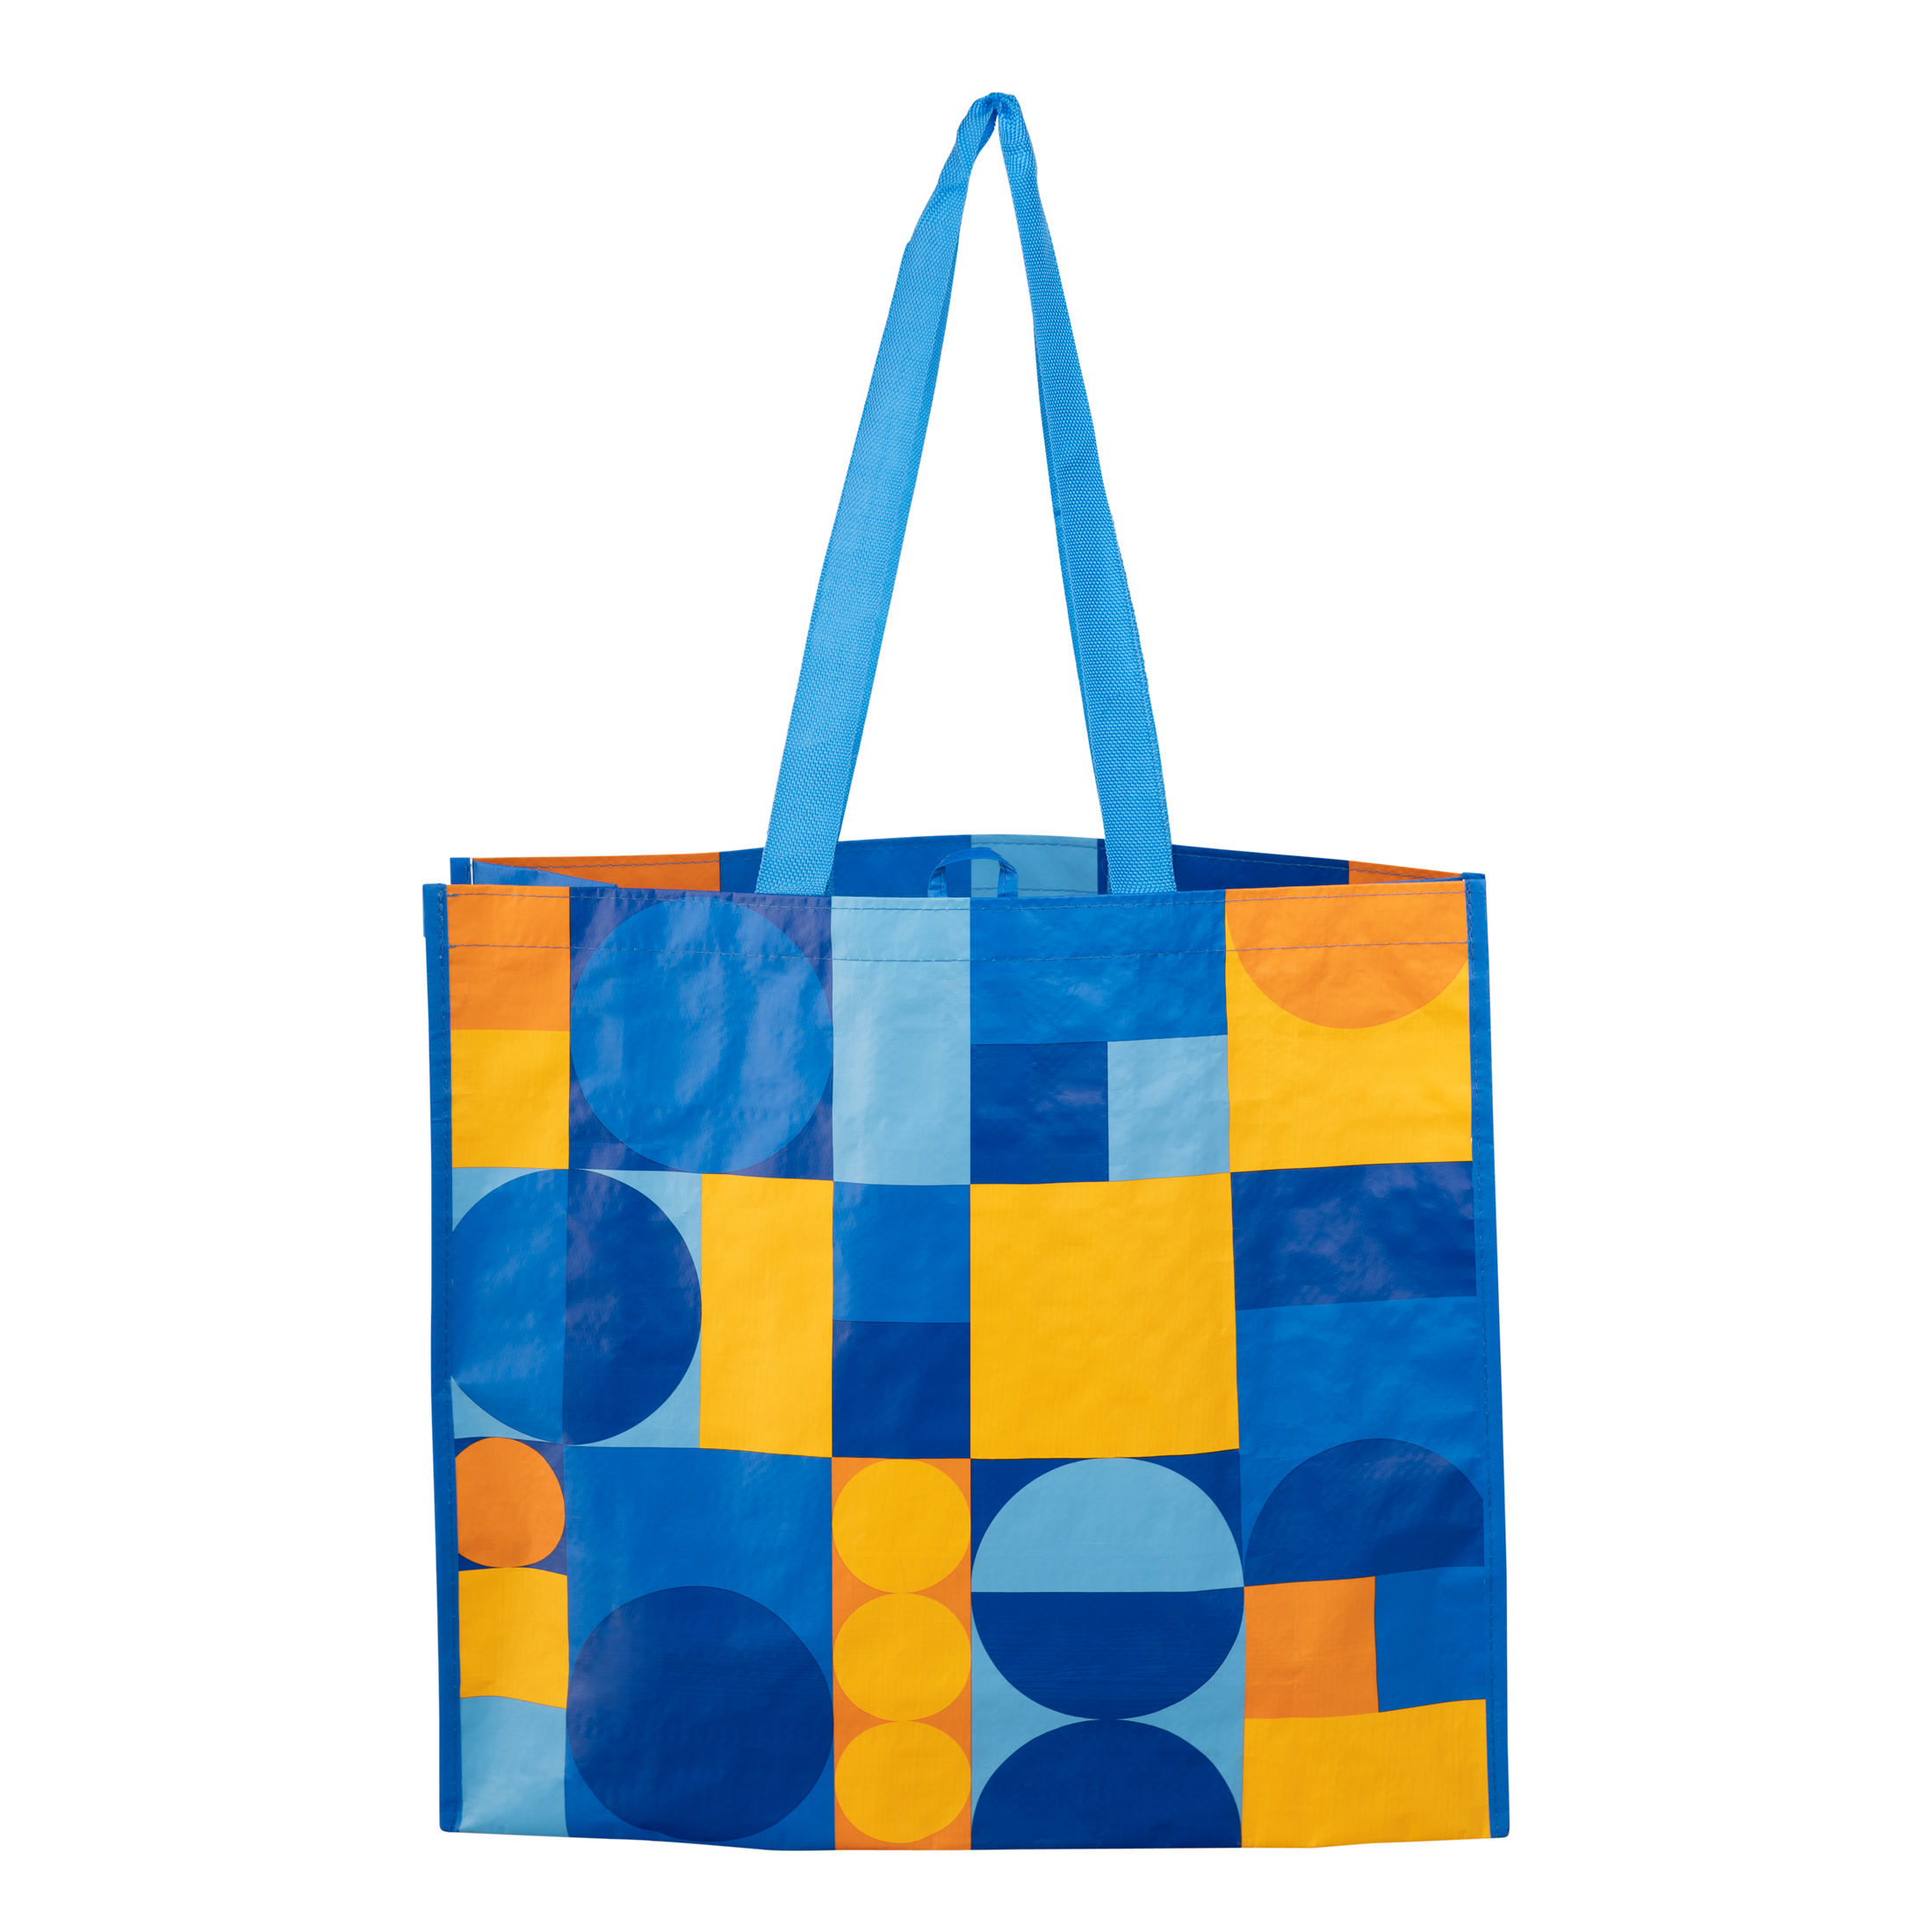 Reusable, Multi-Functional Wide Grocery Bag, Blue and Yellow Abstract Design - image 4 of 5